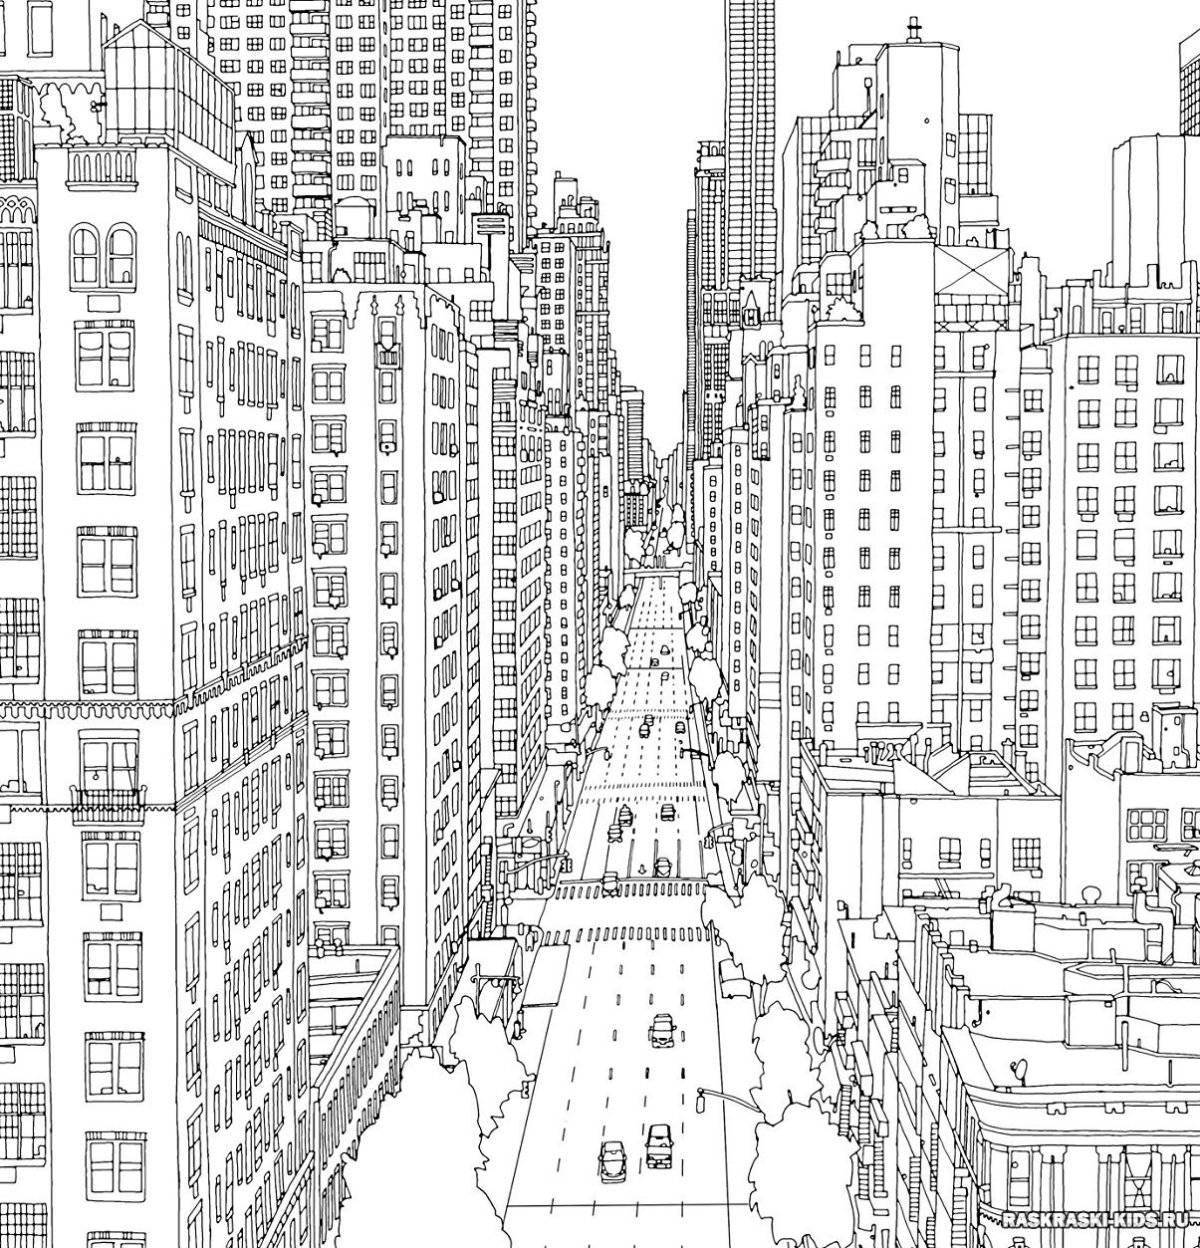 Exciting night city coloring book